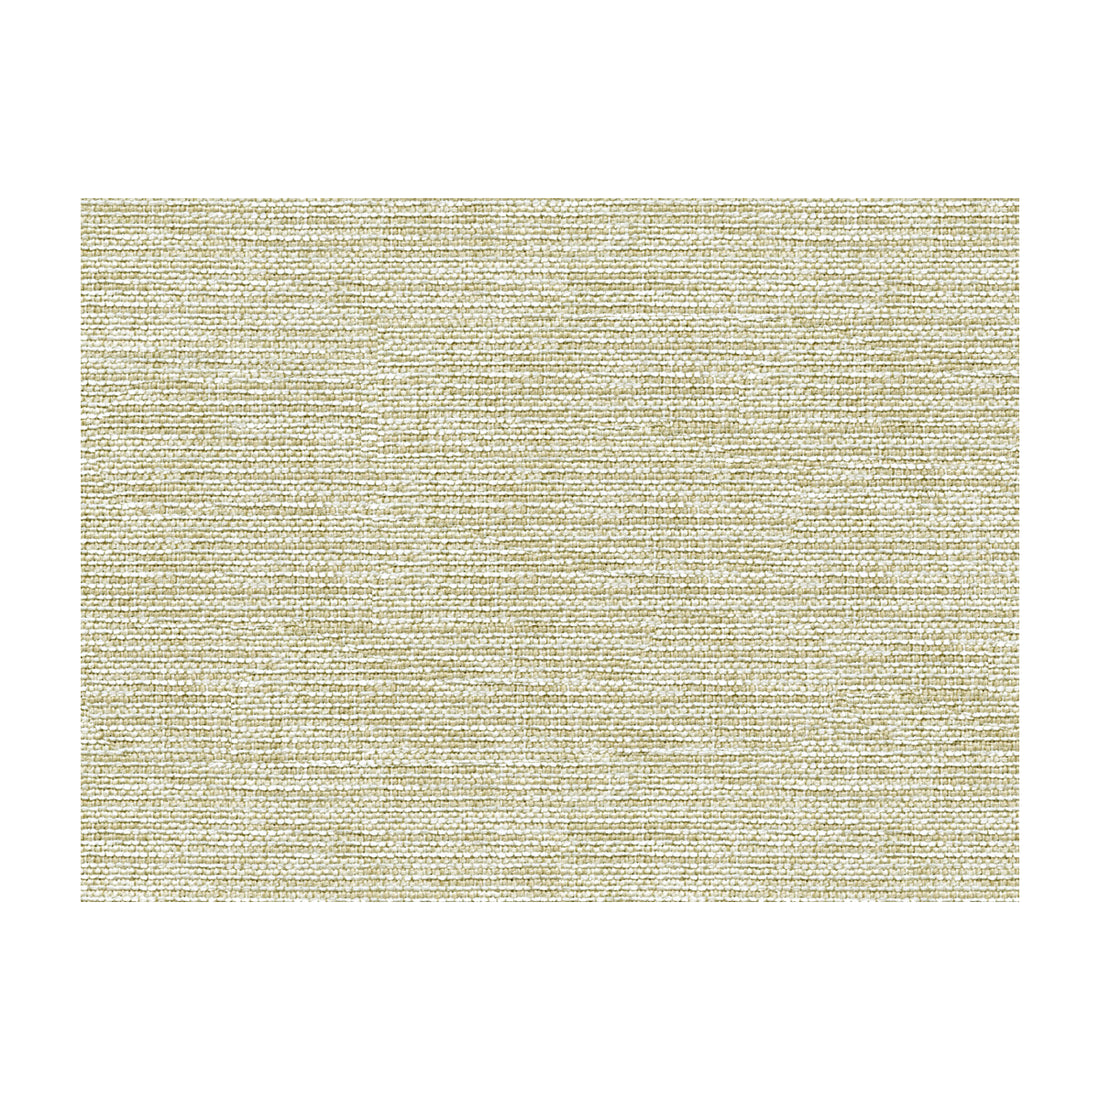 Standford fabric in oyster color - pattern 33406.1116.0 - by Kravet Basics in the Jeffrey Alan Marks Waterside collection